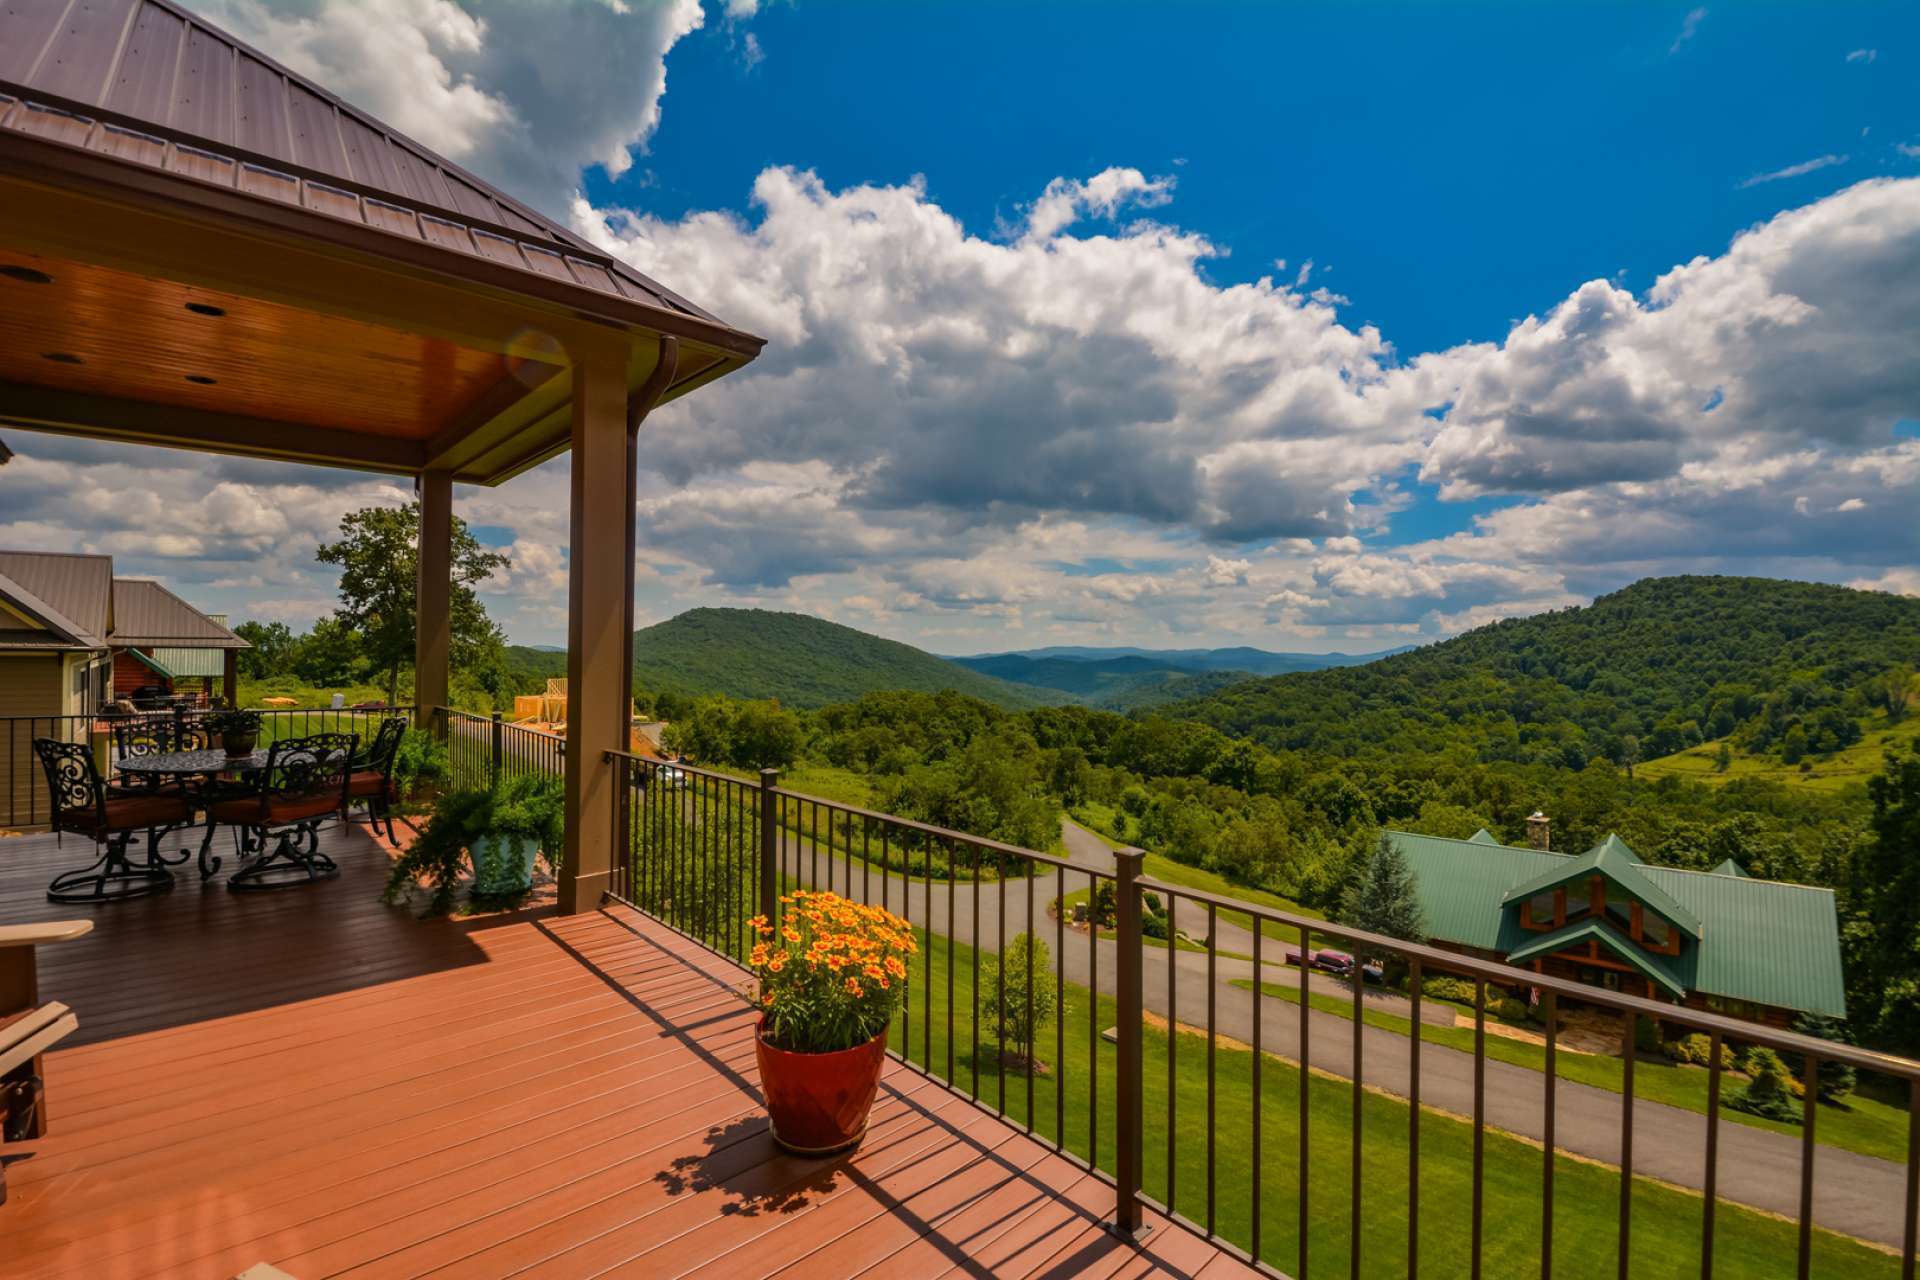 Ahhhhhh...outdoor relaxation and entertaining space galore with this expansive deck. Enjoy the views and quiet peaceful setting here in Elk Ridge after a fun filled day of shopping in nearby Boone or downtown West Jefferson. Or, maybe you enjoyed a day of tubing on the New River.